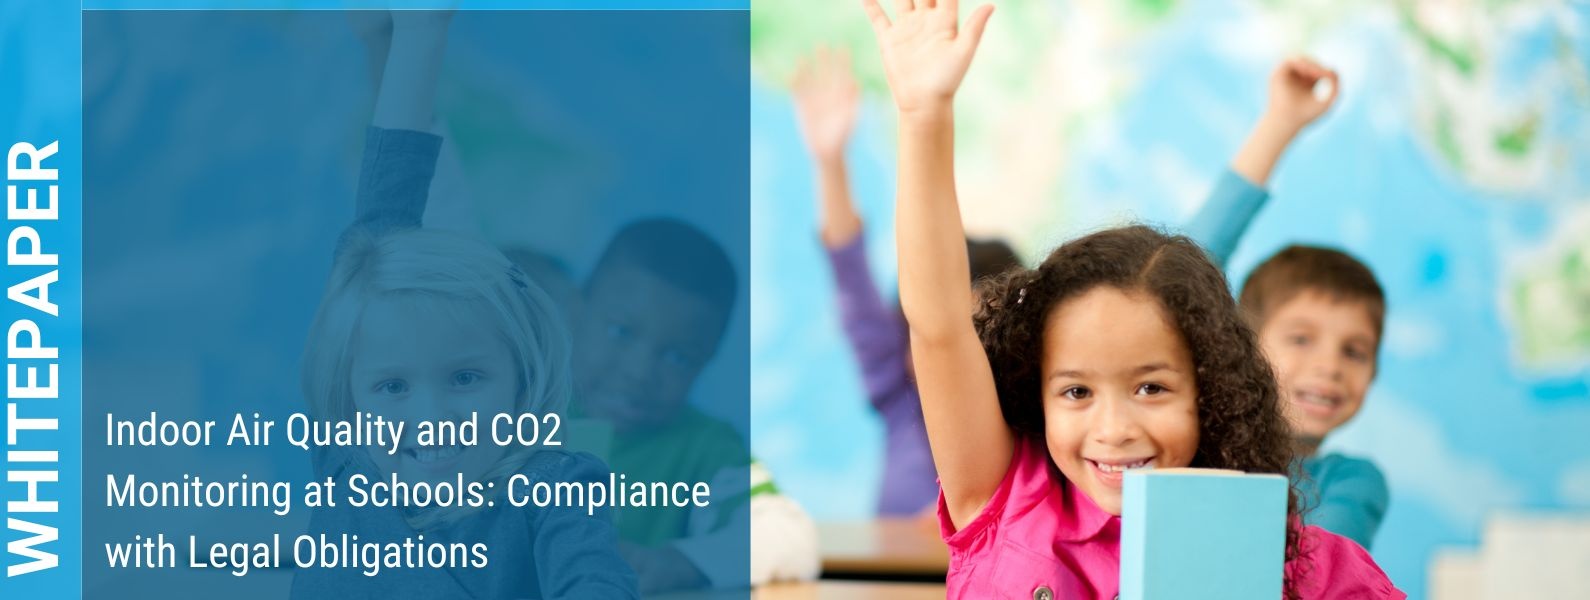 Indoor Air Quality and CO2 Monitoring at Schools: Compliance with Legal Obligations